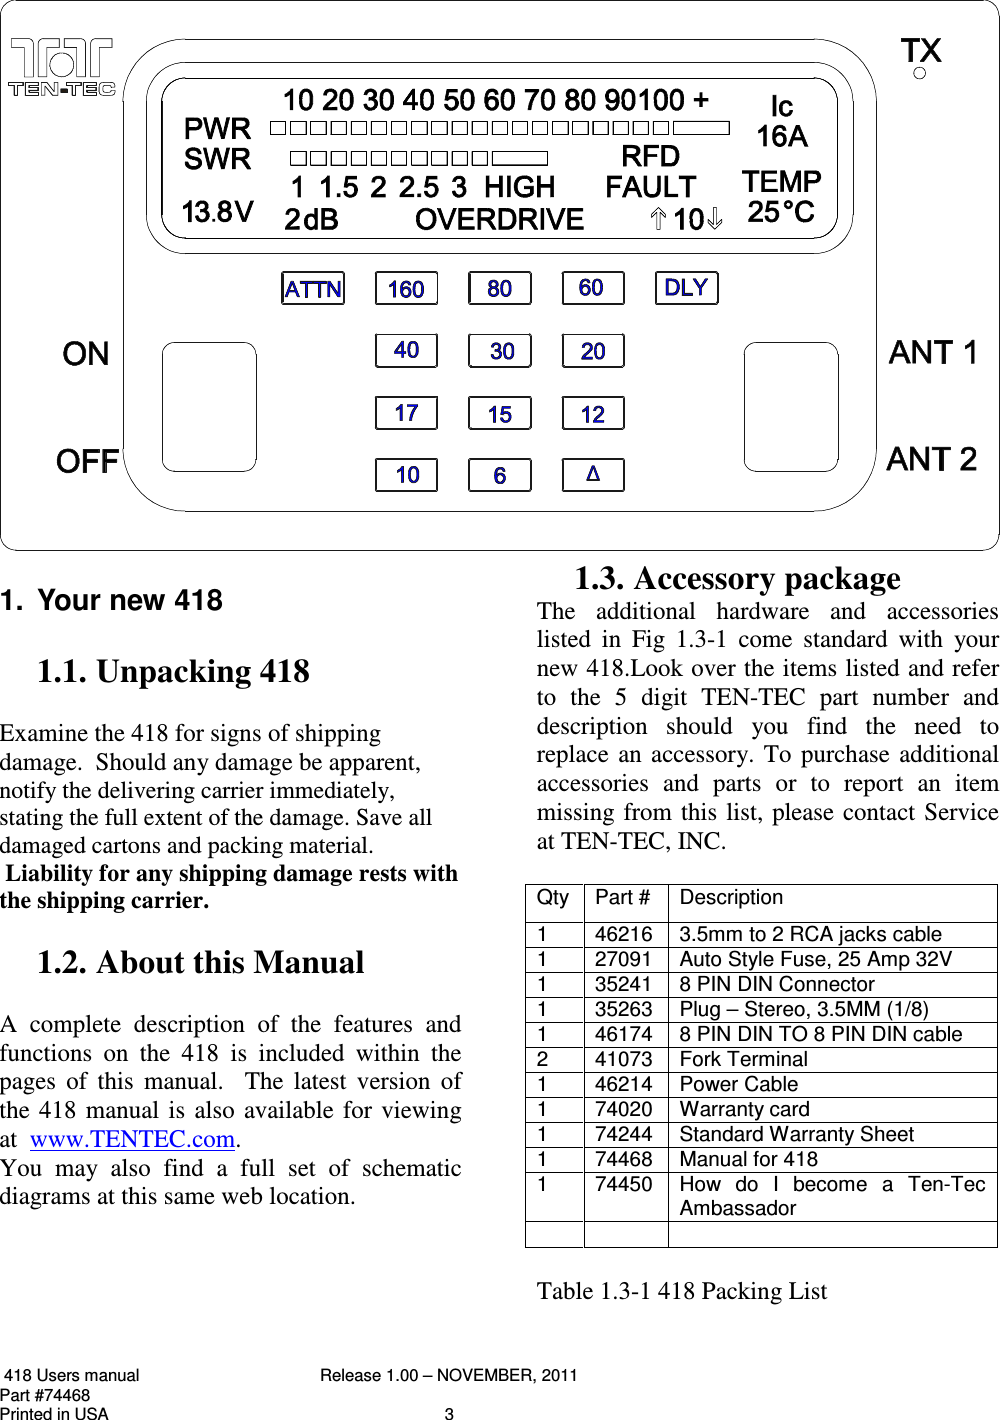  418 Users manual  Release 1.00 – NOVEMBER, 2011   Part #74468   Printed in USA  3  1.  Your new 418  1.1. Unpacking 418  Examine the 418 for signs of shipping damage.  Should any damage be apparent, notify the delivering carrier immediately, stating the full extent of the damage. Save all damaged cartons and packing material.  Liability for any shipping damage rests with the shipping carrier.   1.2. About this Manual  A  complete  description  of  the  features  and functions  on  the  418  is  included  within  the pages  of  this  manual.    The  latest  version  of the  418  manual  is  also  available  for  viewing at  www.TENTEC.com. You  may  also  find  a  full  set  of  schematic diagrams at this same web location.       1.3. Accessory package The  additional  hardware  and  accessories listed  in  Fig  1.3-1  come  standard  with  your new 418.Look over the items listed and refer to  the  5  digit  TEN-TEC  part  number  and description  should  you  find  the  need  to replace  an  accessory. To  purchase  additional accessories  and  parts  or  to  report  an  item missing  from this  list,  please contact Service at TEN-TEC, INC.  Qty  Part #  Description 1  46216  3.5mm to 2 RCA jacks cable 1  27091  Auto Style Fuse, 25 Amp 32V 1  35241  8 PIN DIN Connector 1  35263  Plug – Stereo, 3.5MM (1/8) 1  46174  8 PIN DIN TO 8 PIN DIN cable 2  41073  Fork Terminal 1  46214  Power Cable  1  74020  Warranty card 1  74244  Standard Warranty Sheet 1  74468  Manual for 418 1  74450  How  do  I  become  a  Ten-Tec Ambassador       Table 1.3-1 418 Packing List 